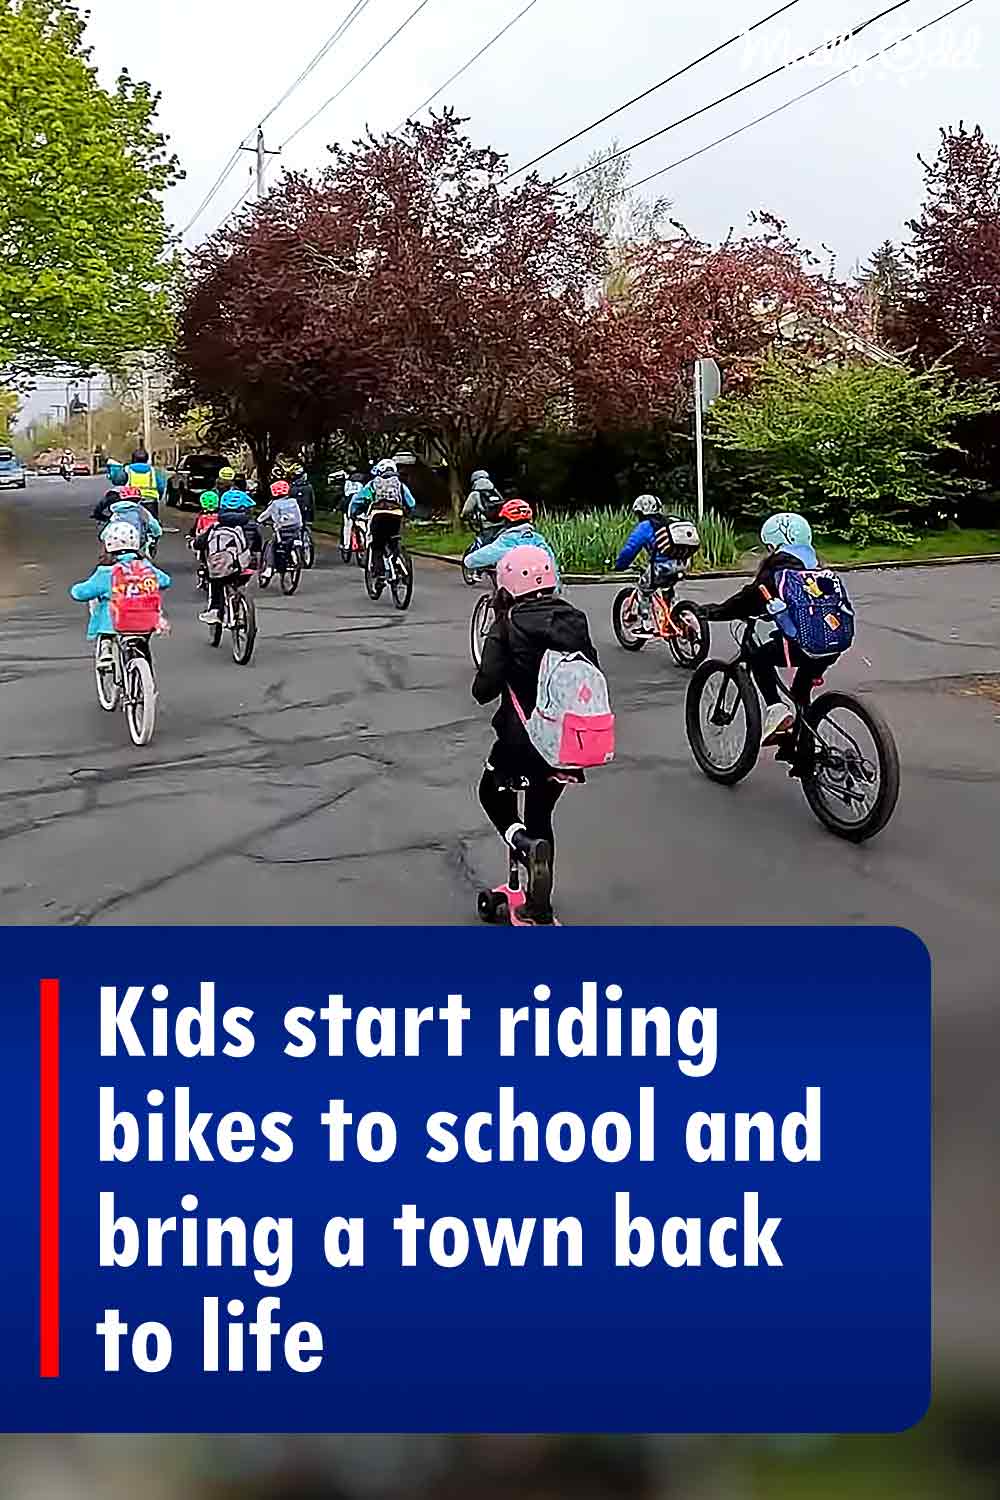 Kids start riding bikes to school and bring a town back to life